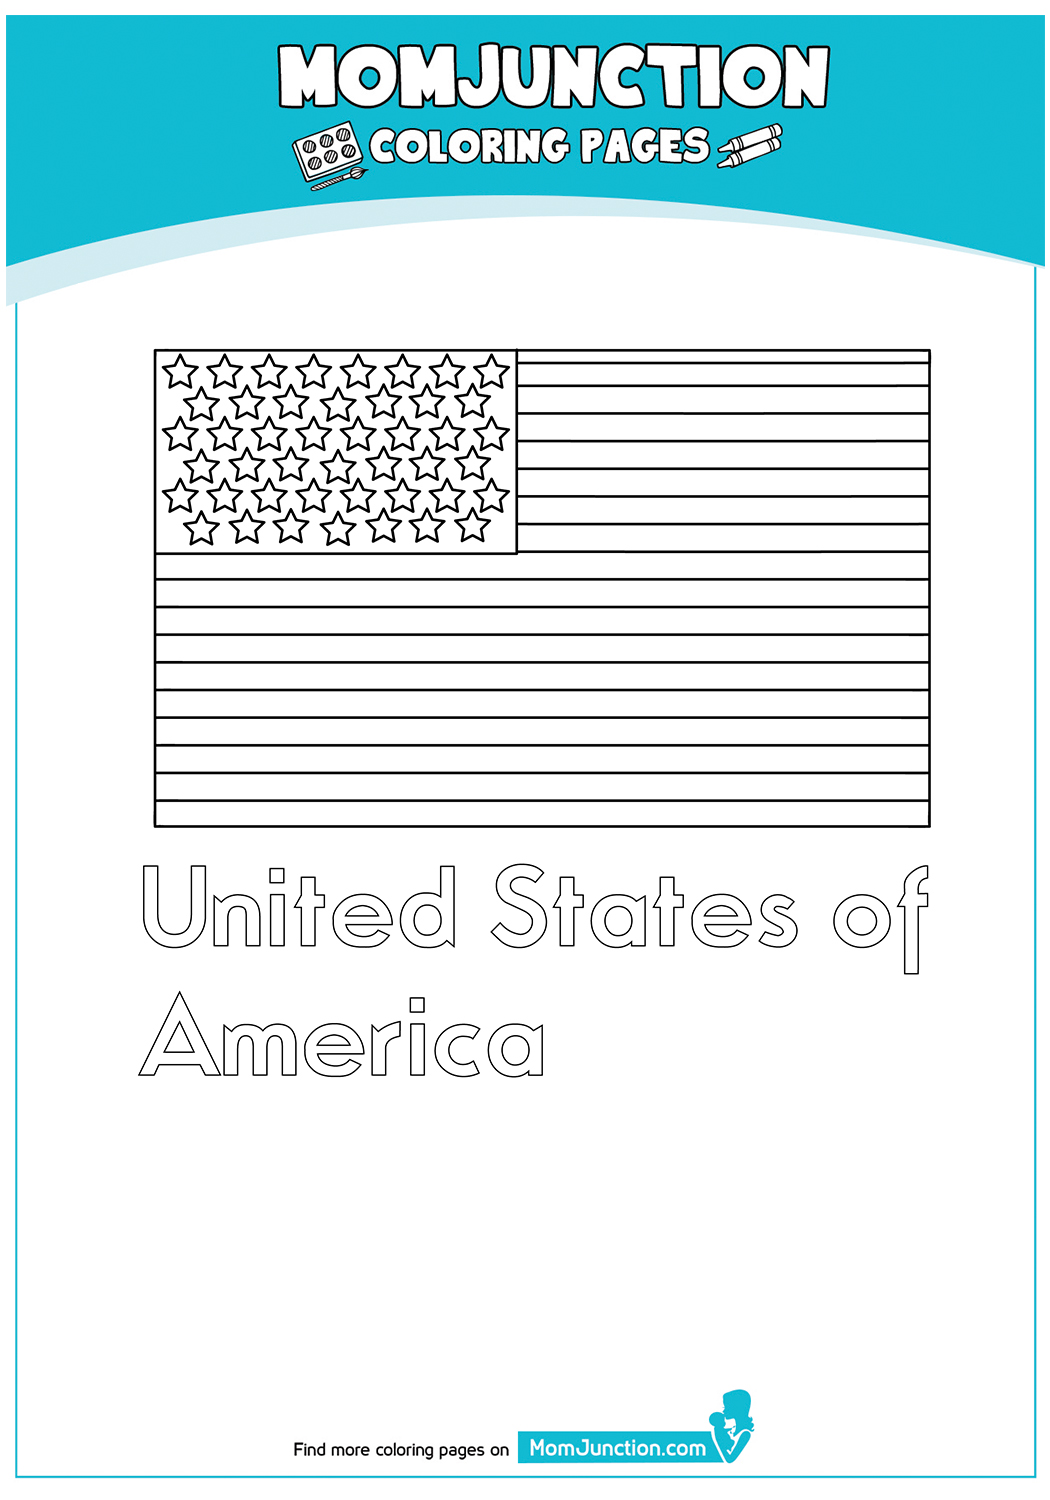 The-United-States-Of-America-17